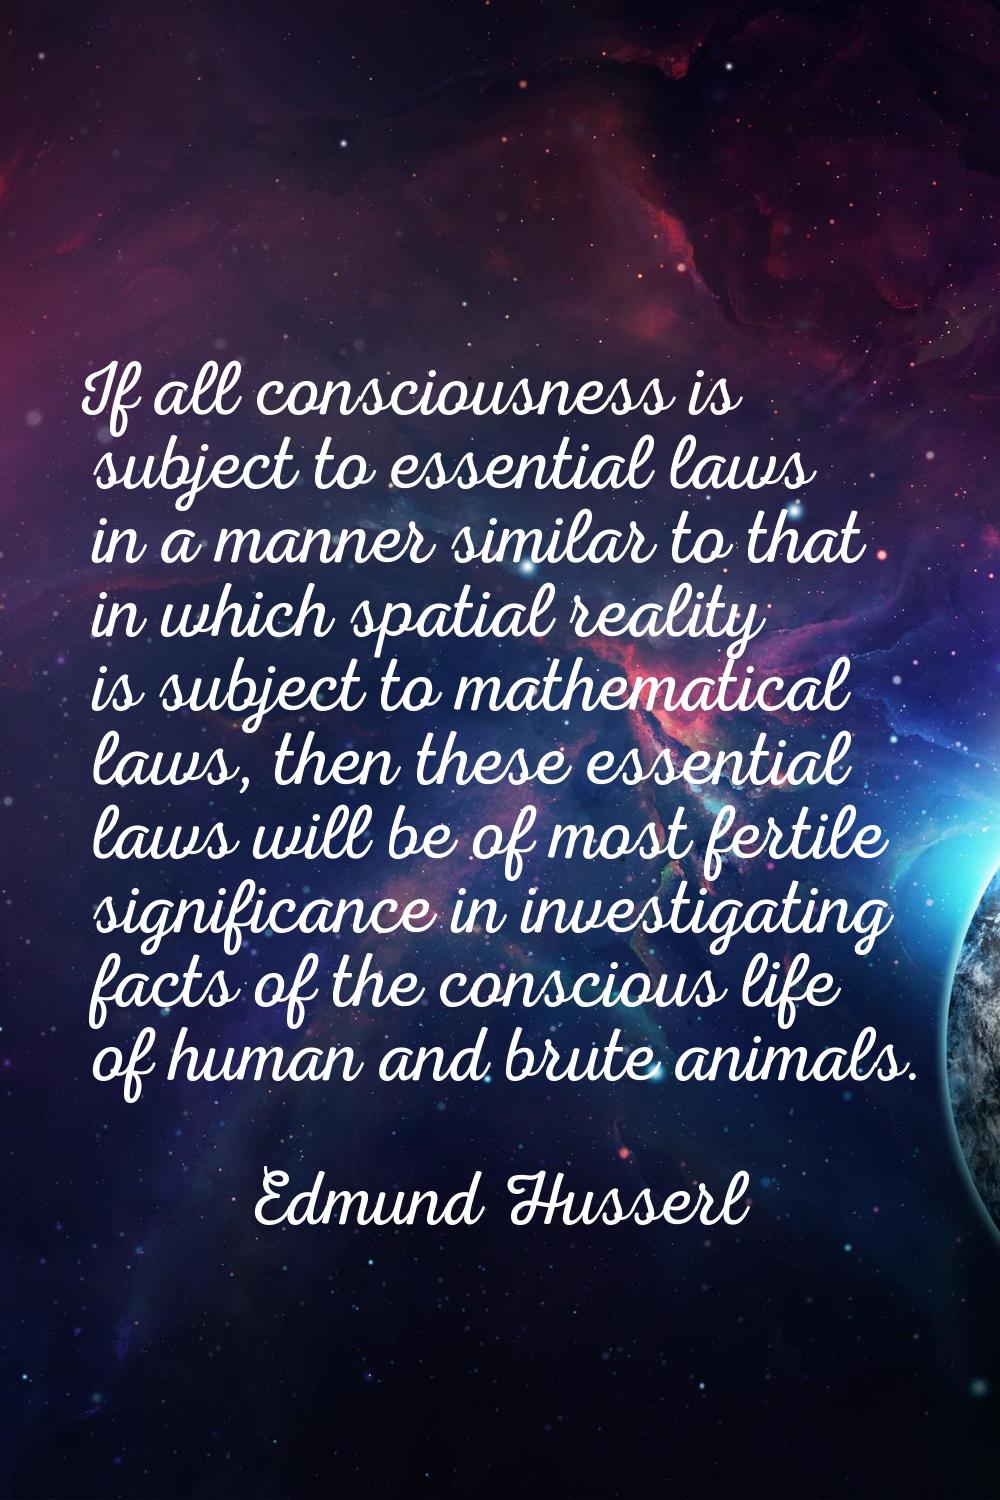 If all consciousness is subject to essential laws in a manner similar to that in which spatial real